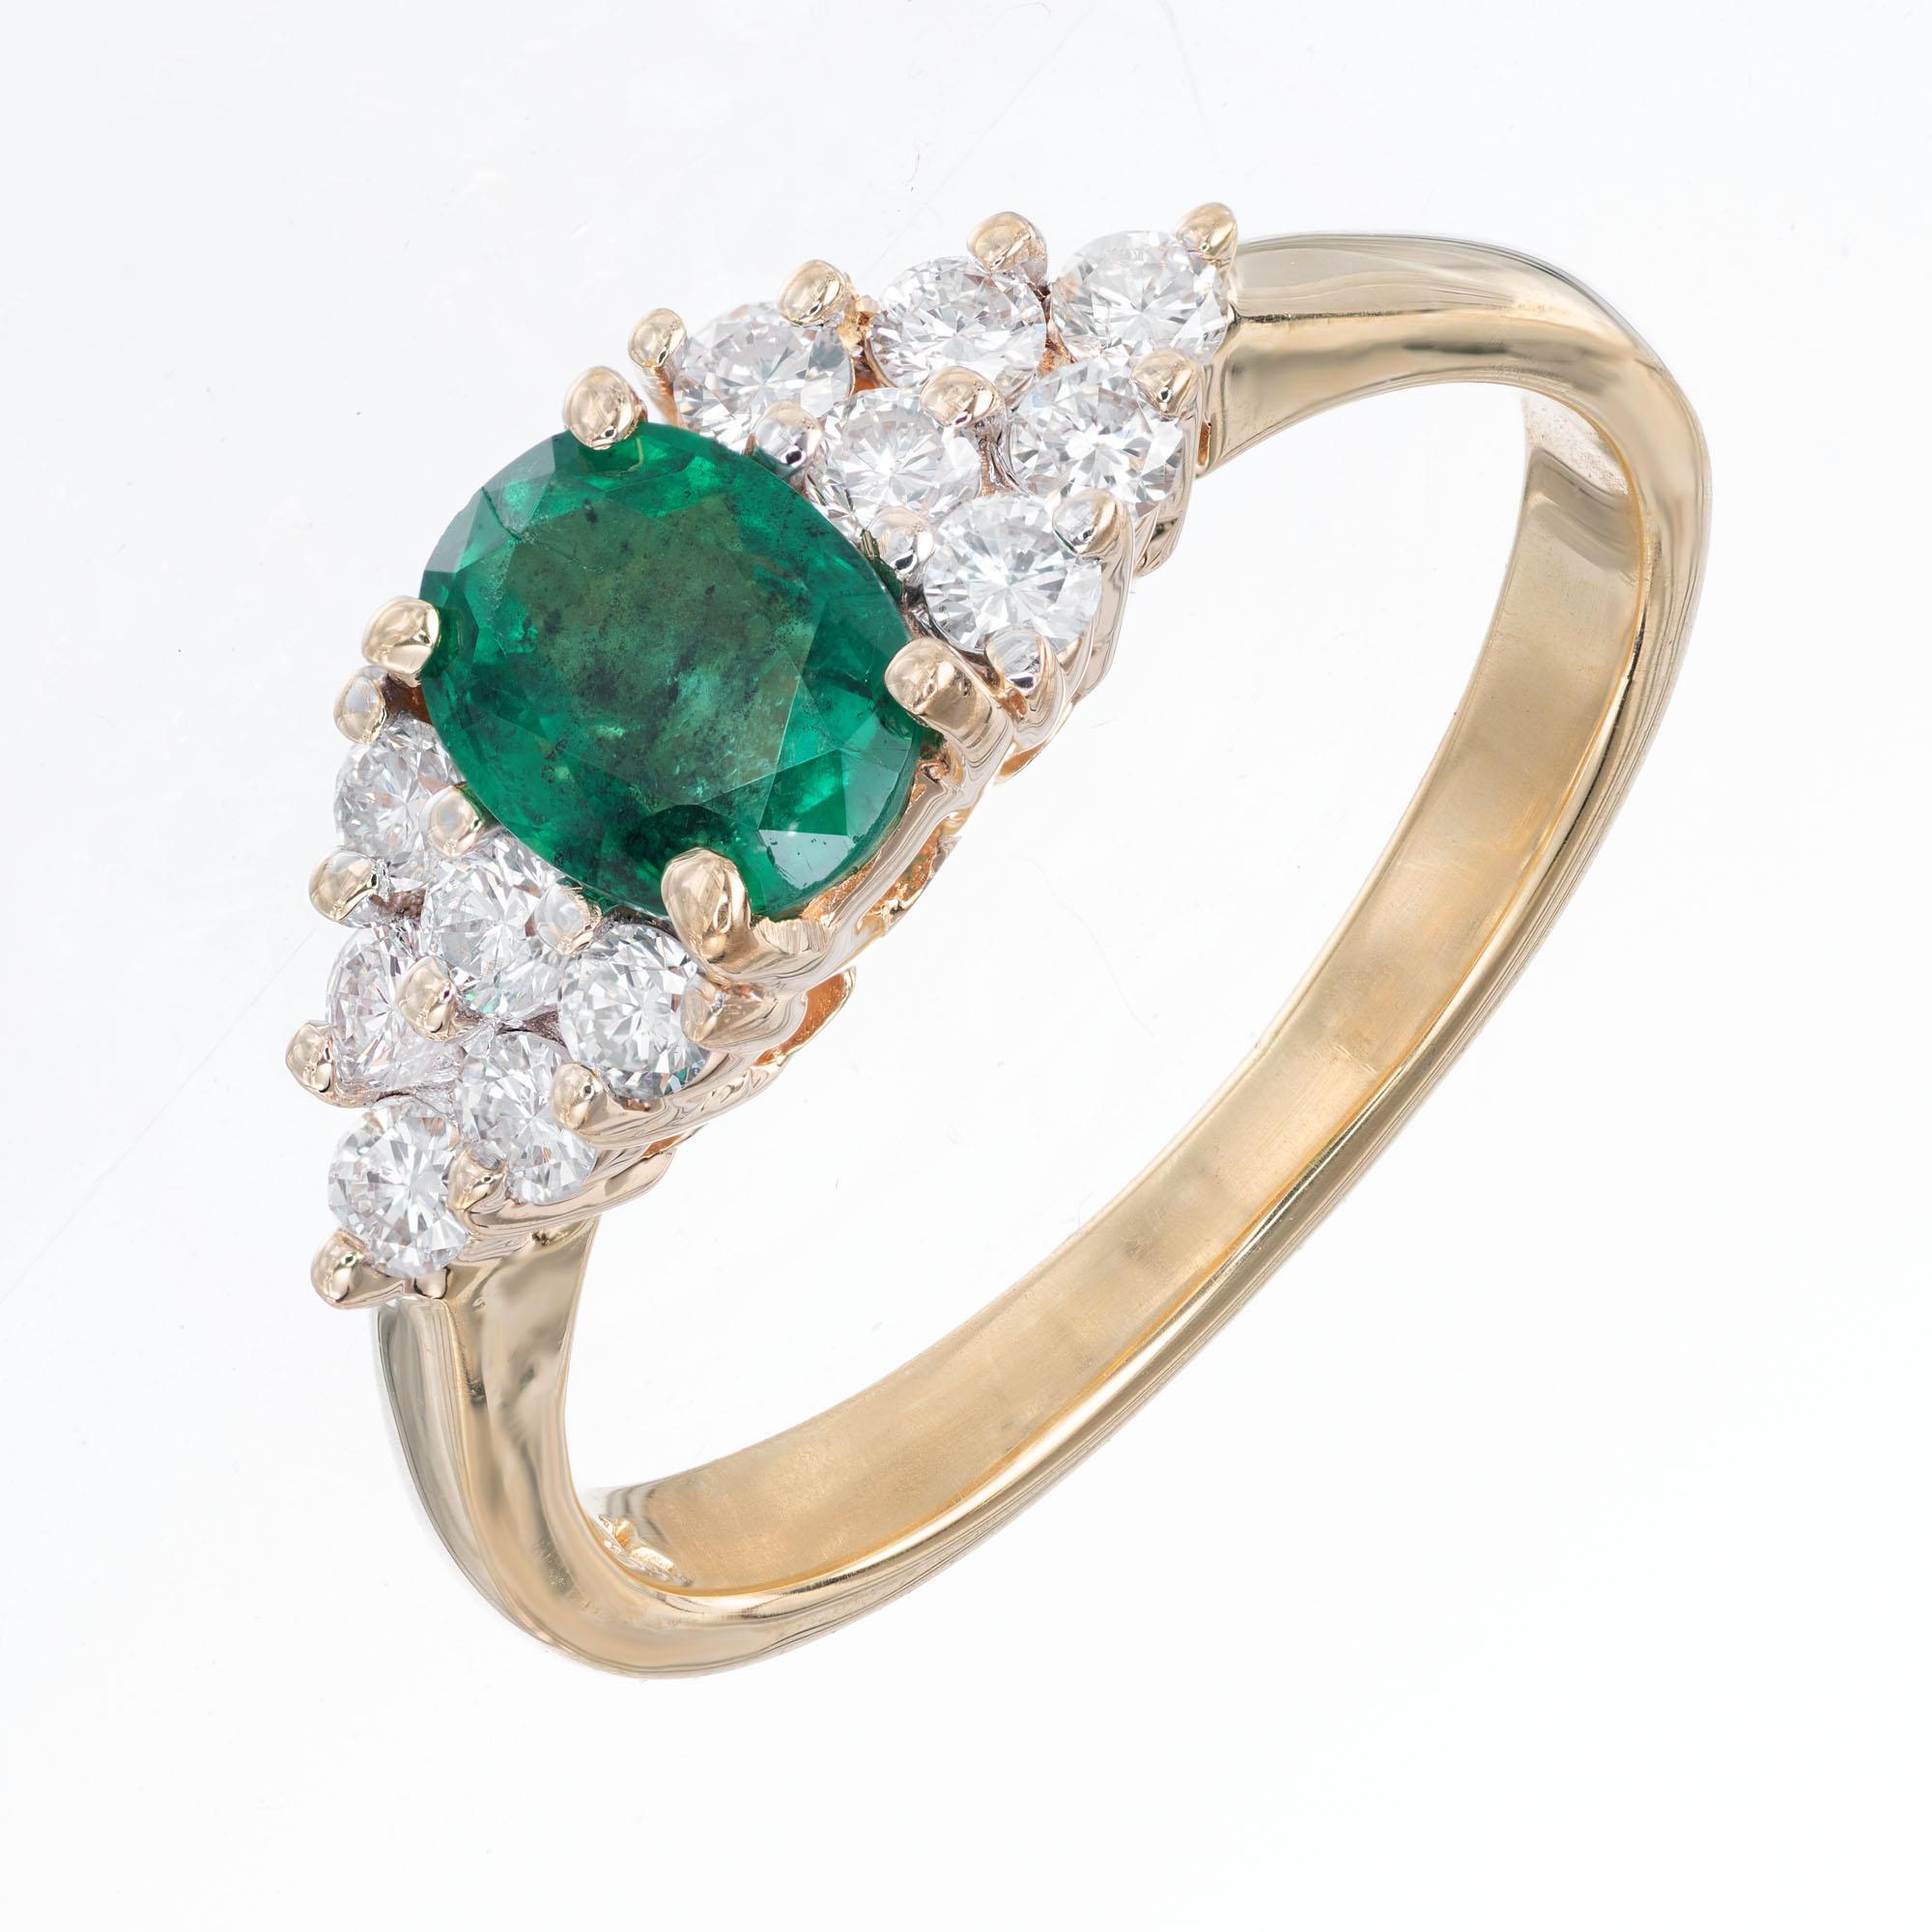 Emerald and diamond engagement ring. .65cts center oval emerald with triangle of 6 clustered diamonds on each side, in a 14k yellow gold setting. 

1 oval emerald .65cts, 6.2 x 4.9mm approx. total weight .65cts
12 round diamonds approx. total weight